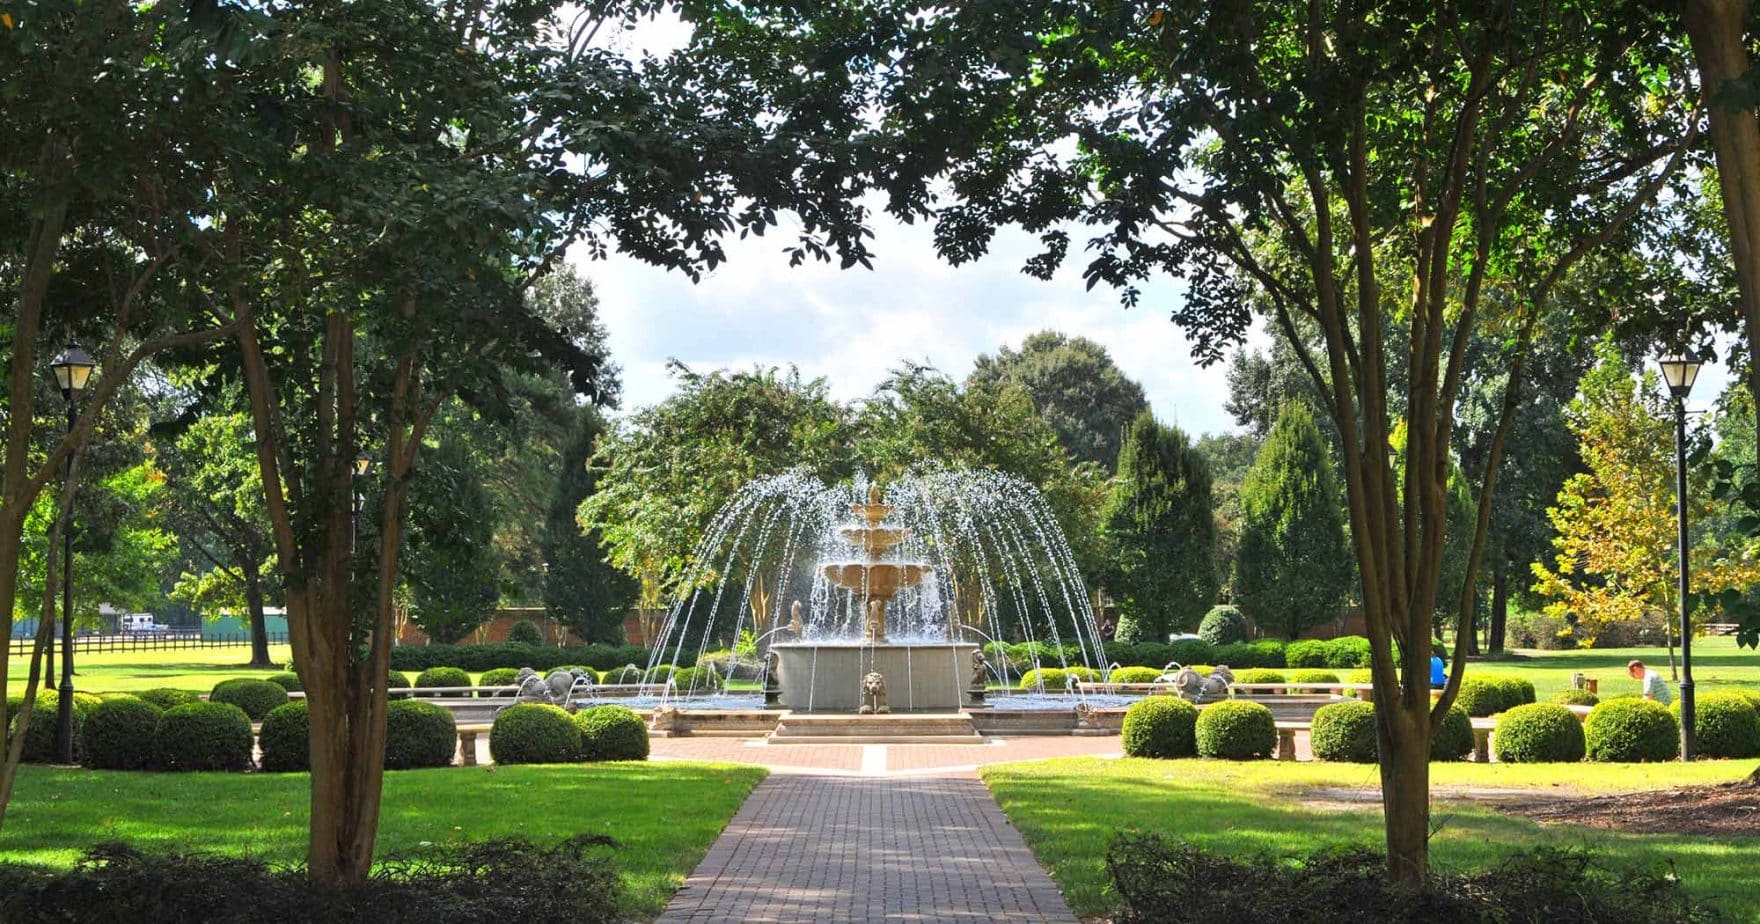 The fountain at Regent, a Christian university in Virginia that has been ranked by The Princeton Review among the top 50 online MBA programs in the nation.